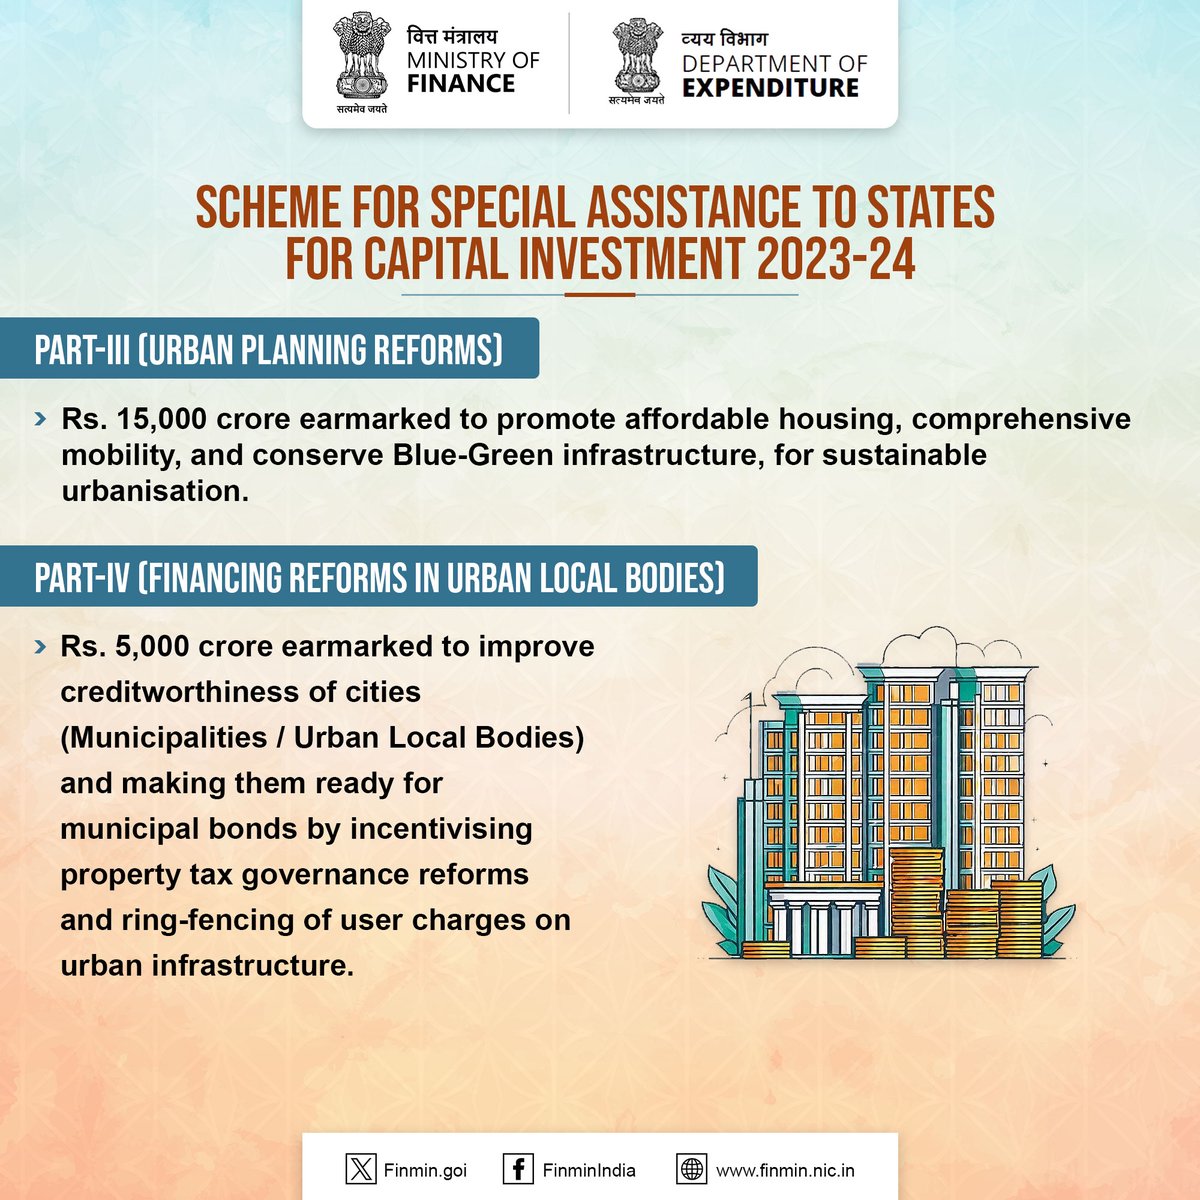 #FinMinReview2023 : Department of Expenditure approved Scheme for Special Assistance to incentivise States for #CapitalInvestment and #CapitalExpenditure in eight areas for FY2023-24.  #ViksitBharat